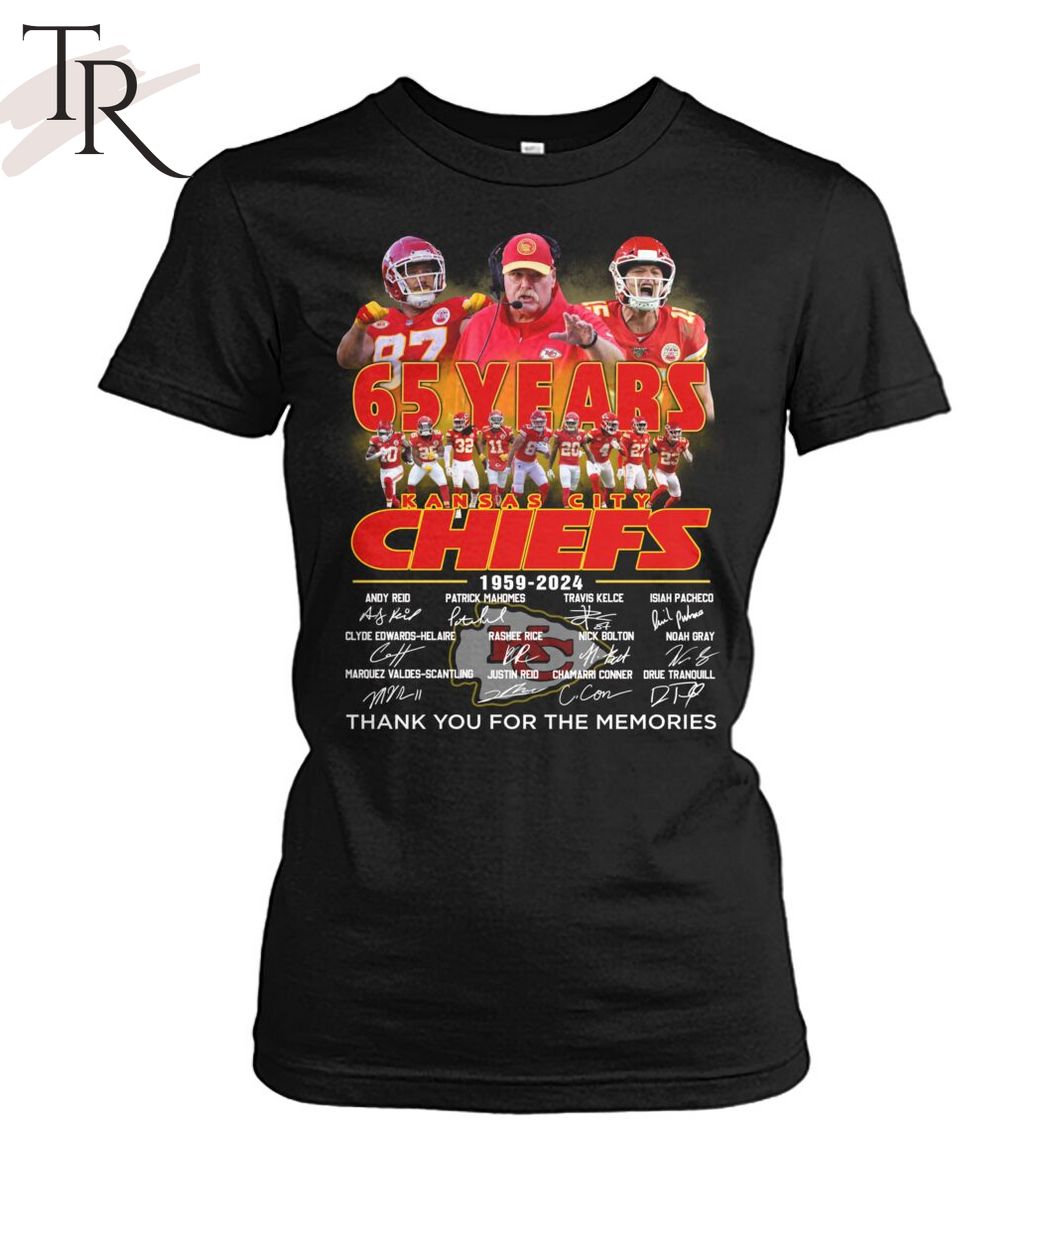 65 Years Kansas City Chiefs 1959 - 2024 Thank You For The Memories T-Shirt